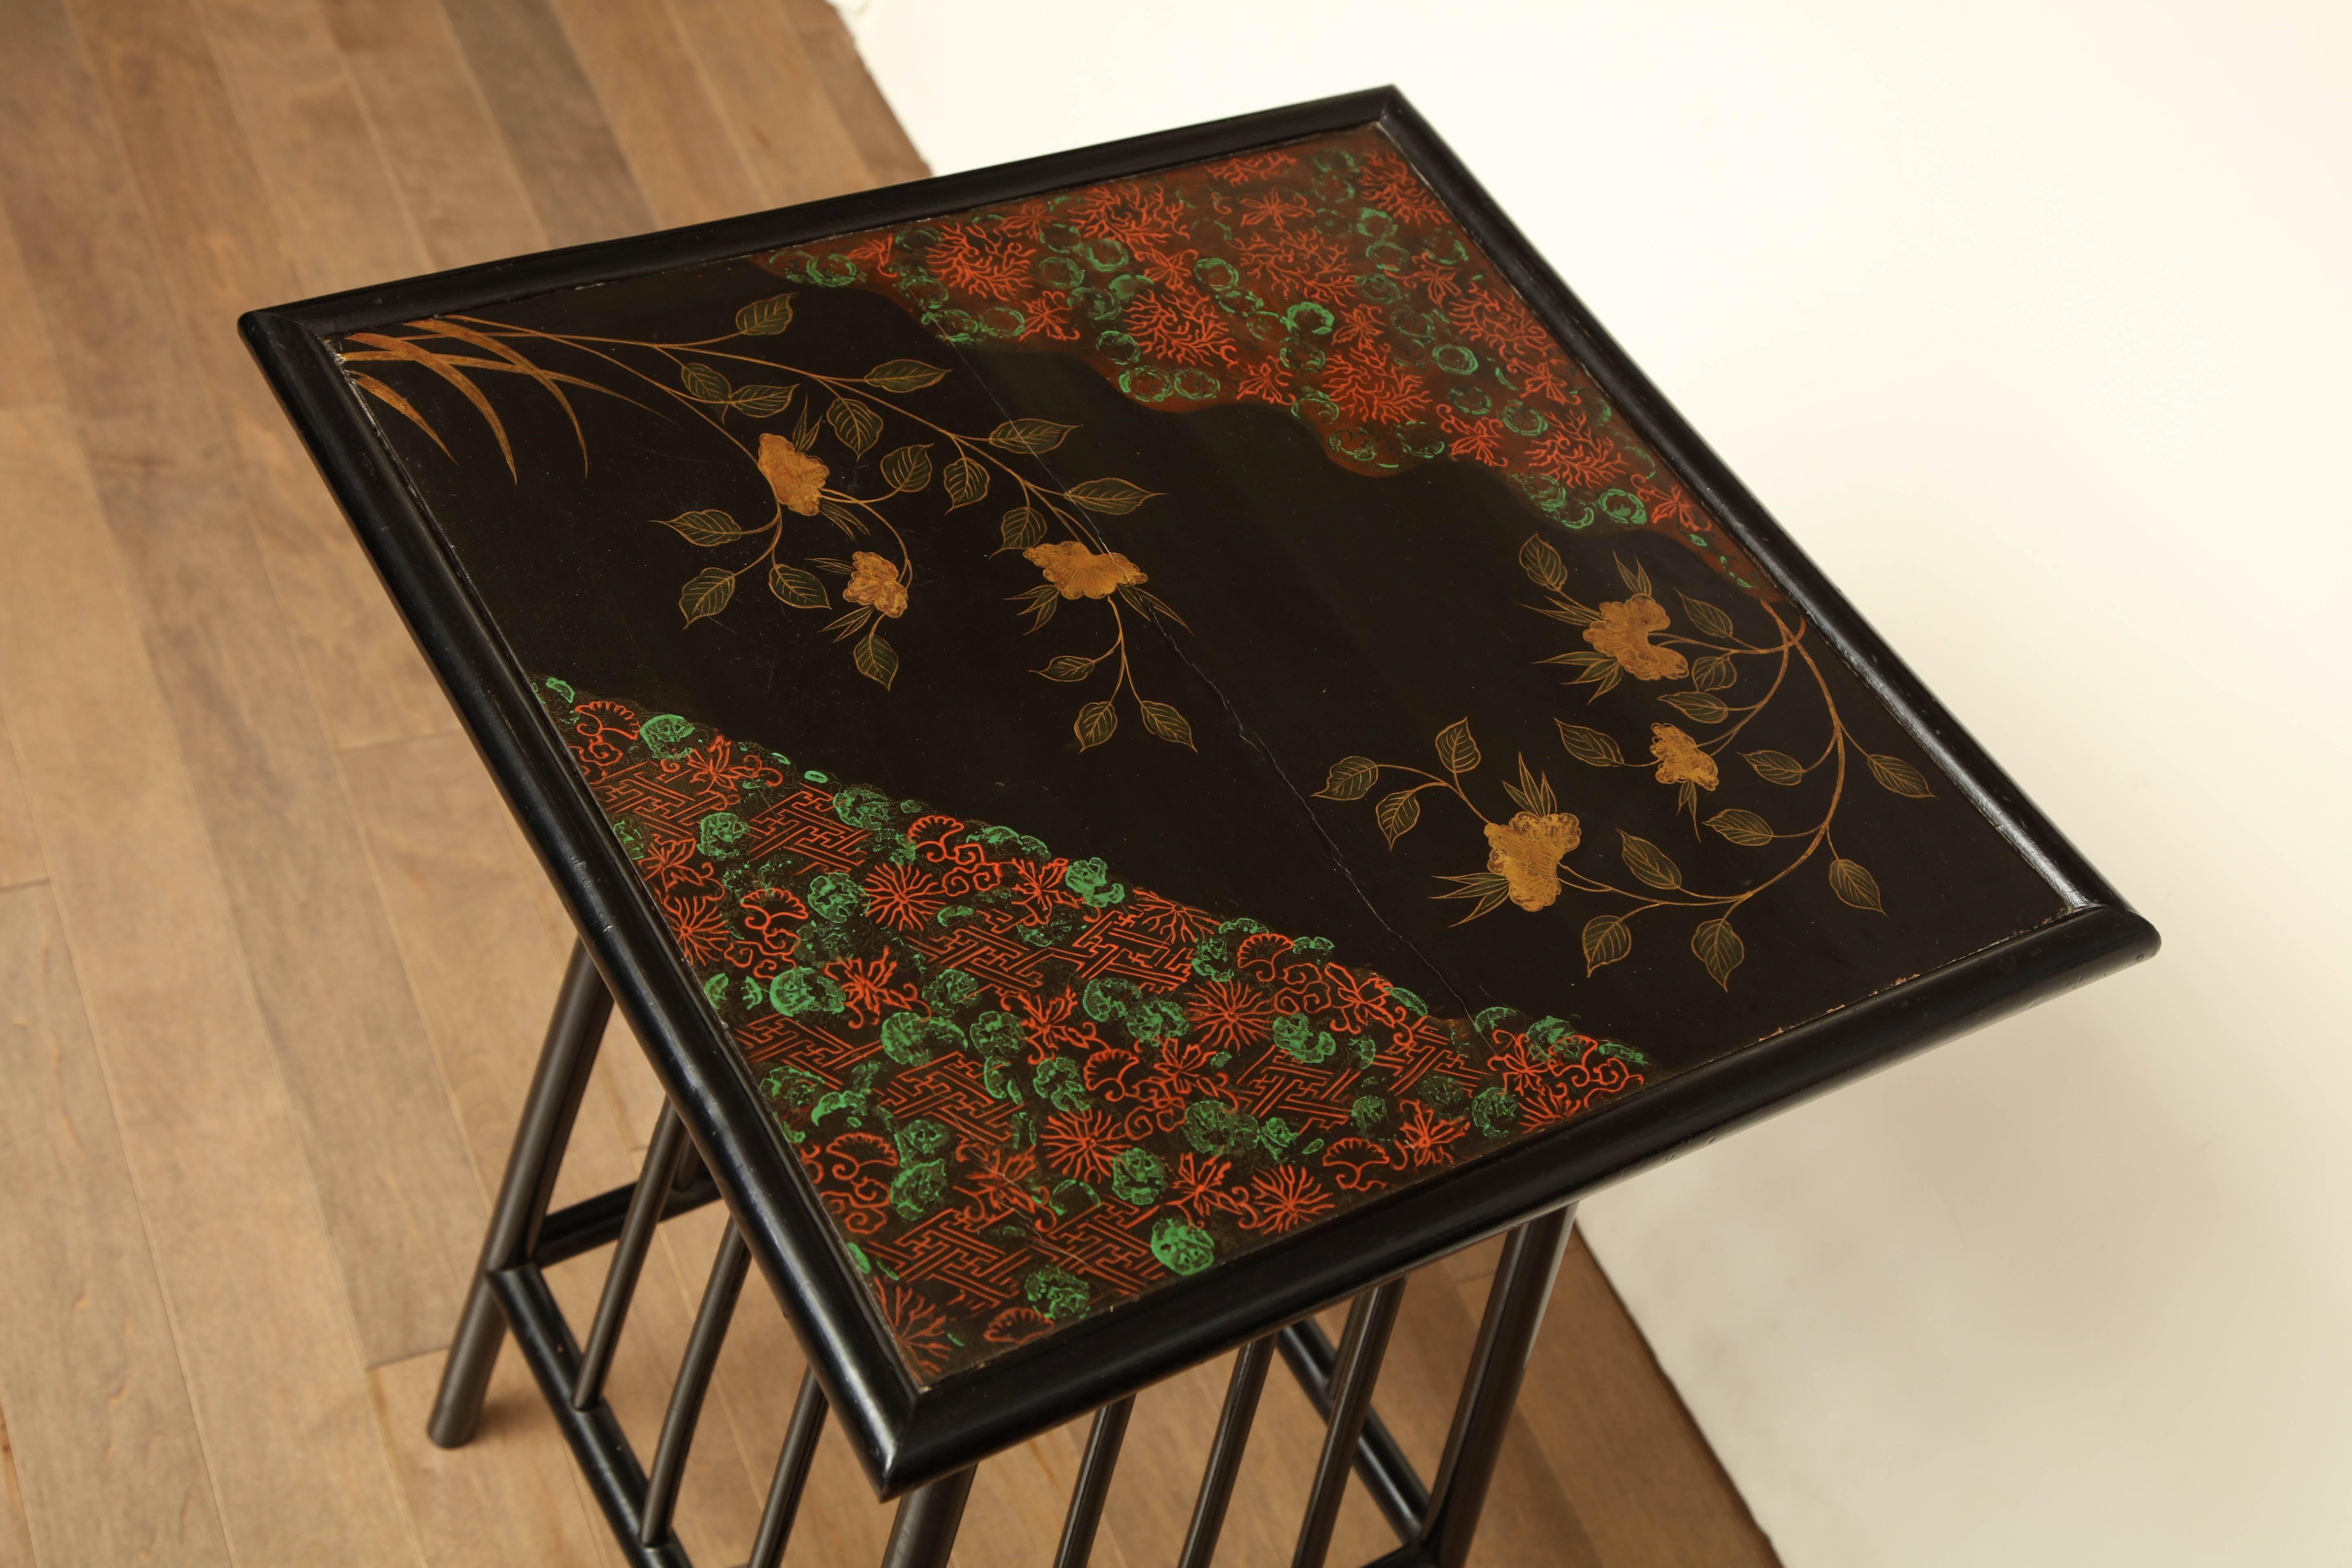 Late 19th century English, Aesthetic Movement table.